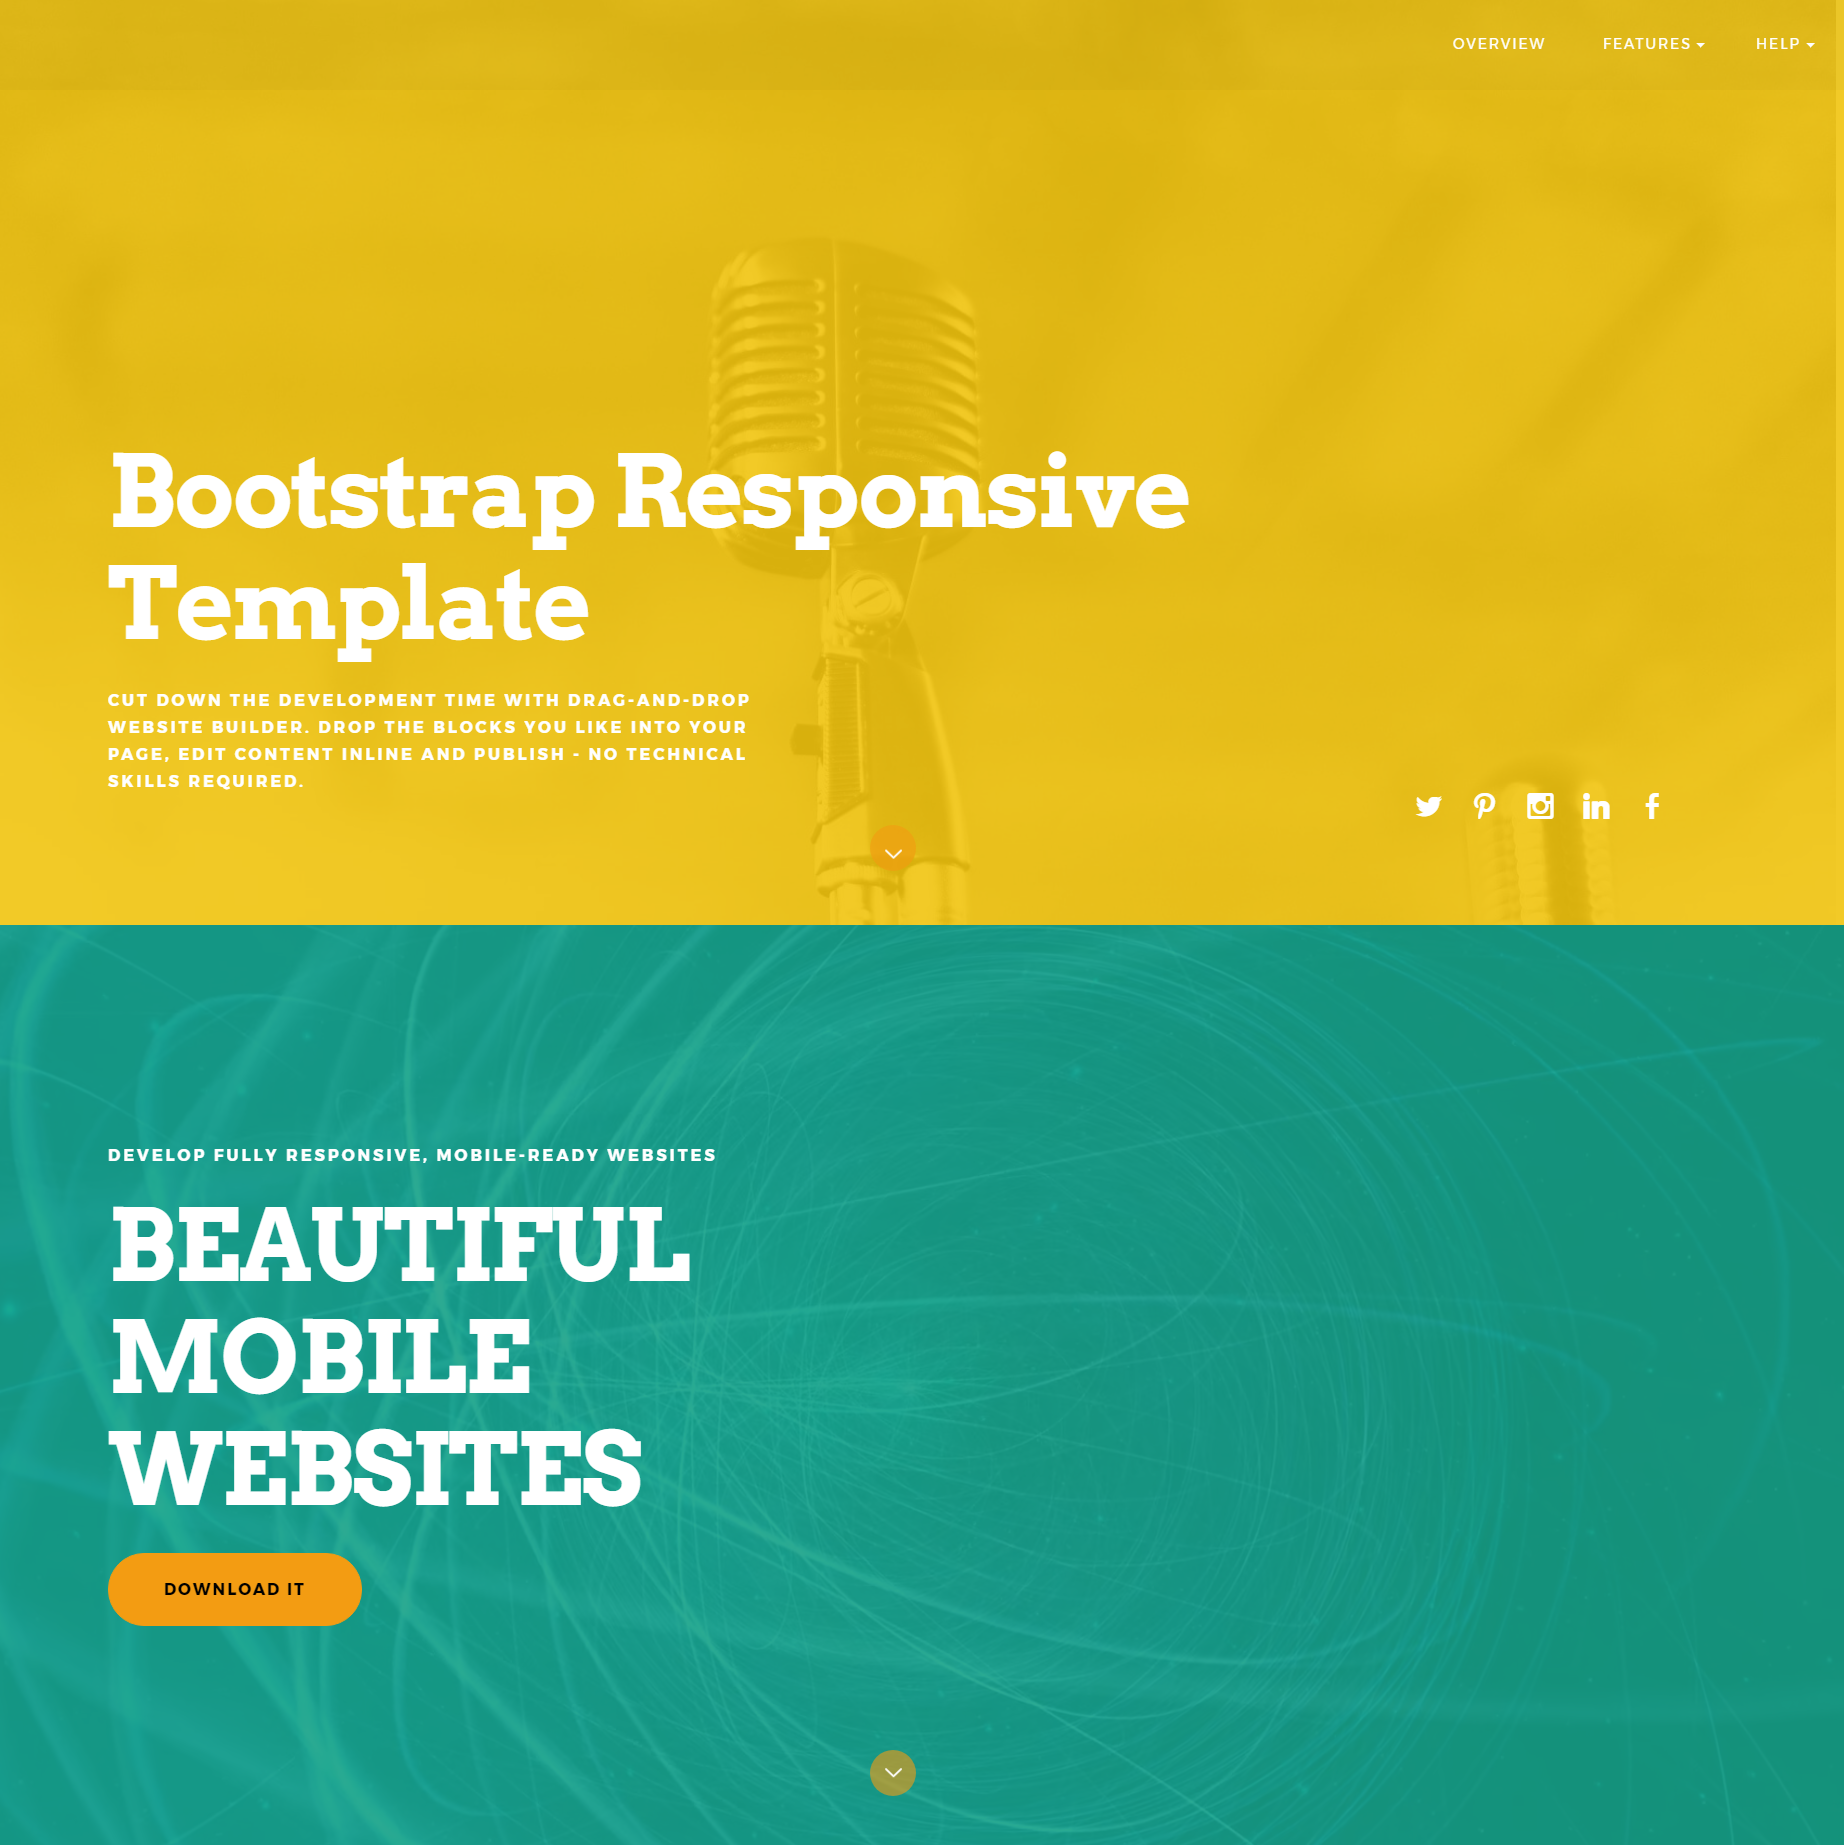 HTML Bootstrap Responsive Templates